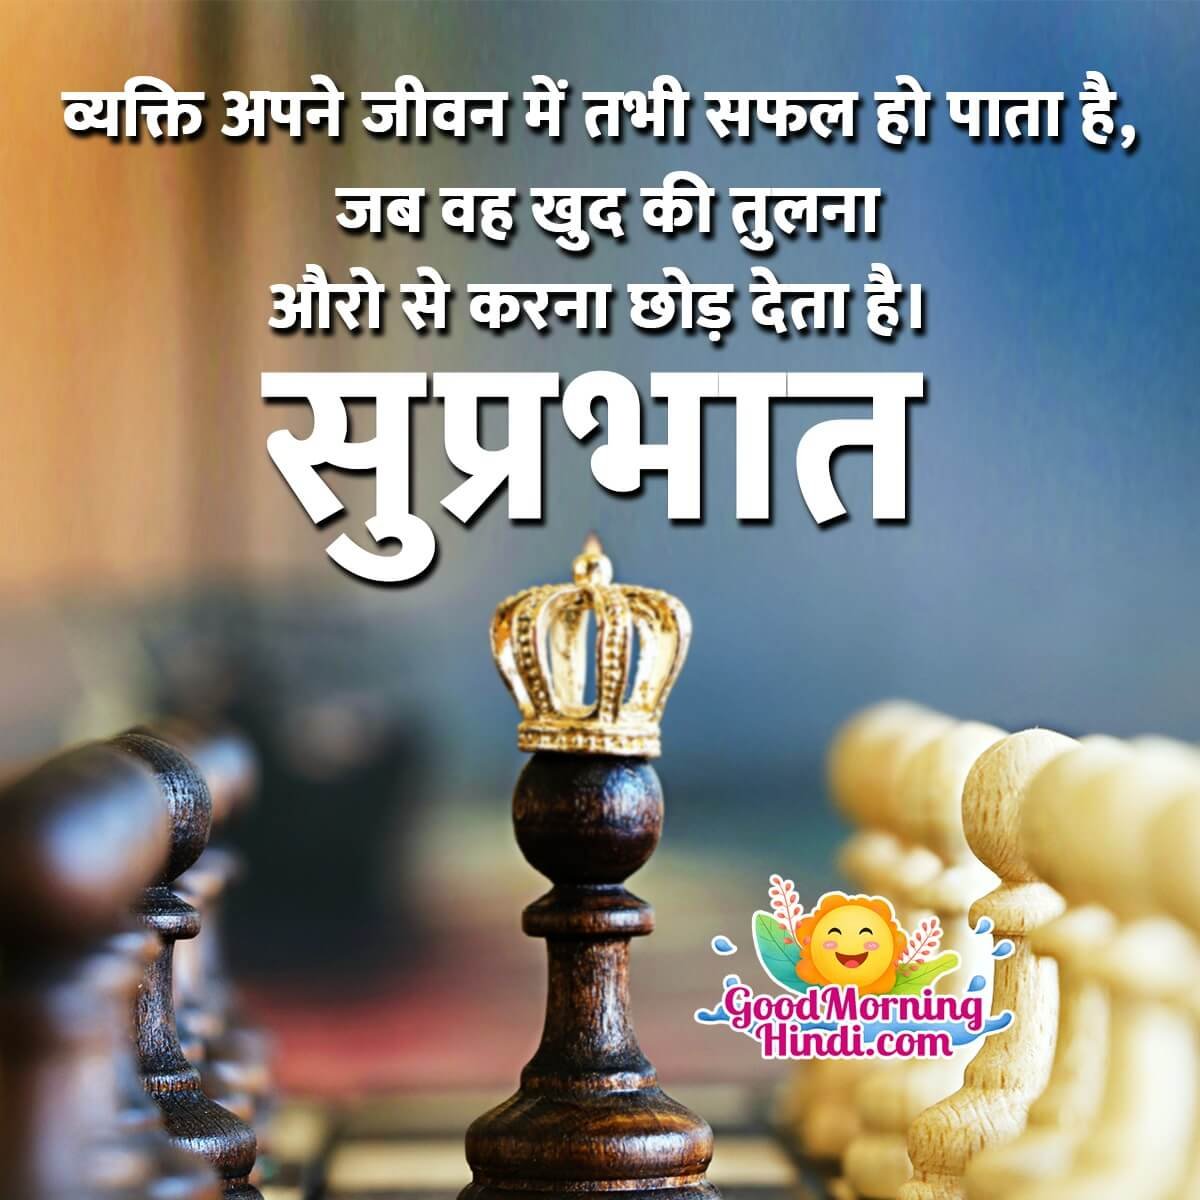 Best Morning Message In Hindi